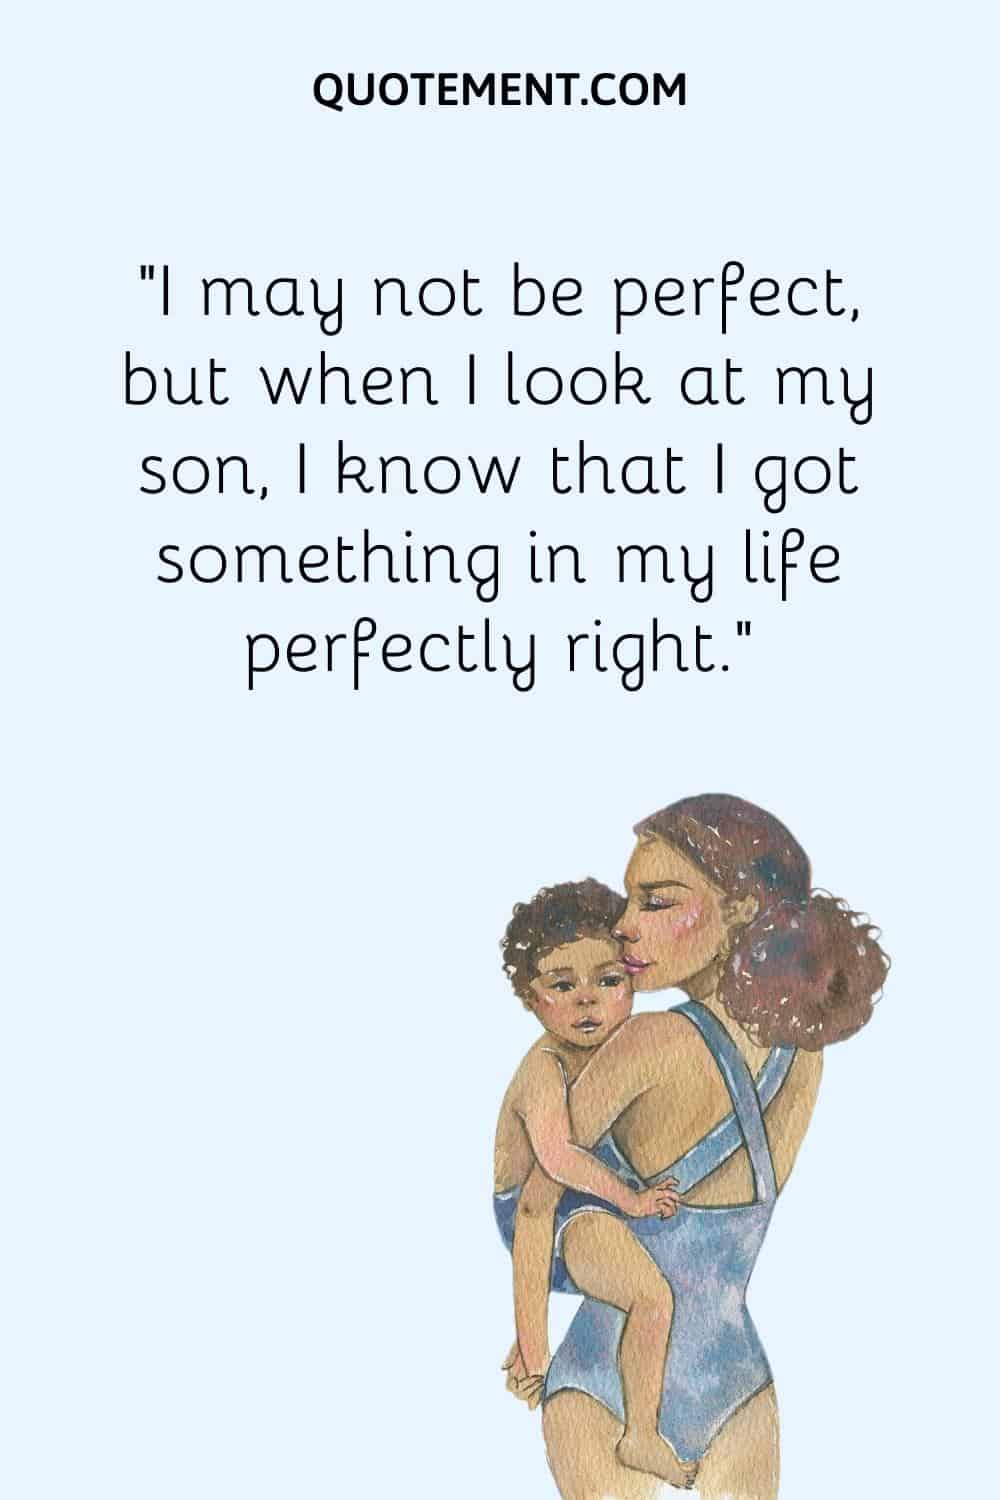 “I may not be perfect, but when I look at my son, I know that I got something in my life perfectly right.”